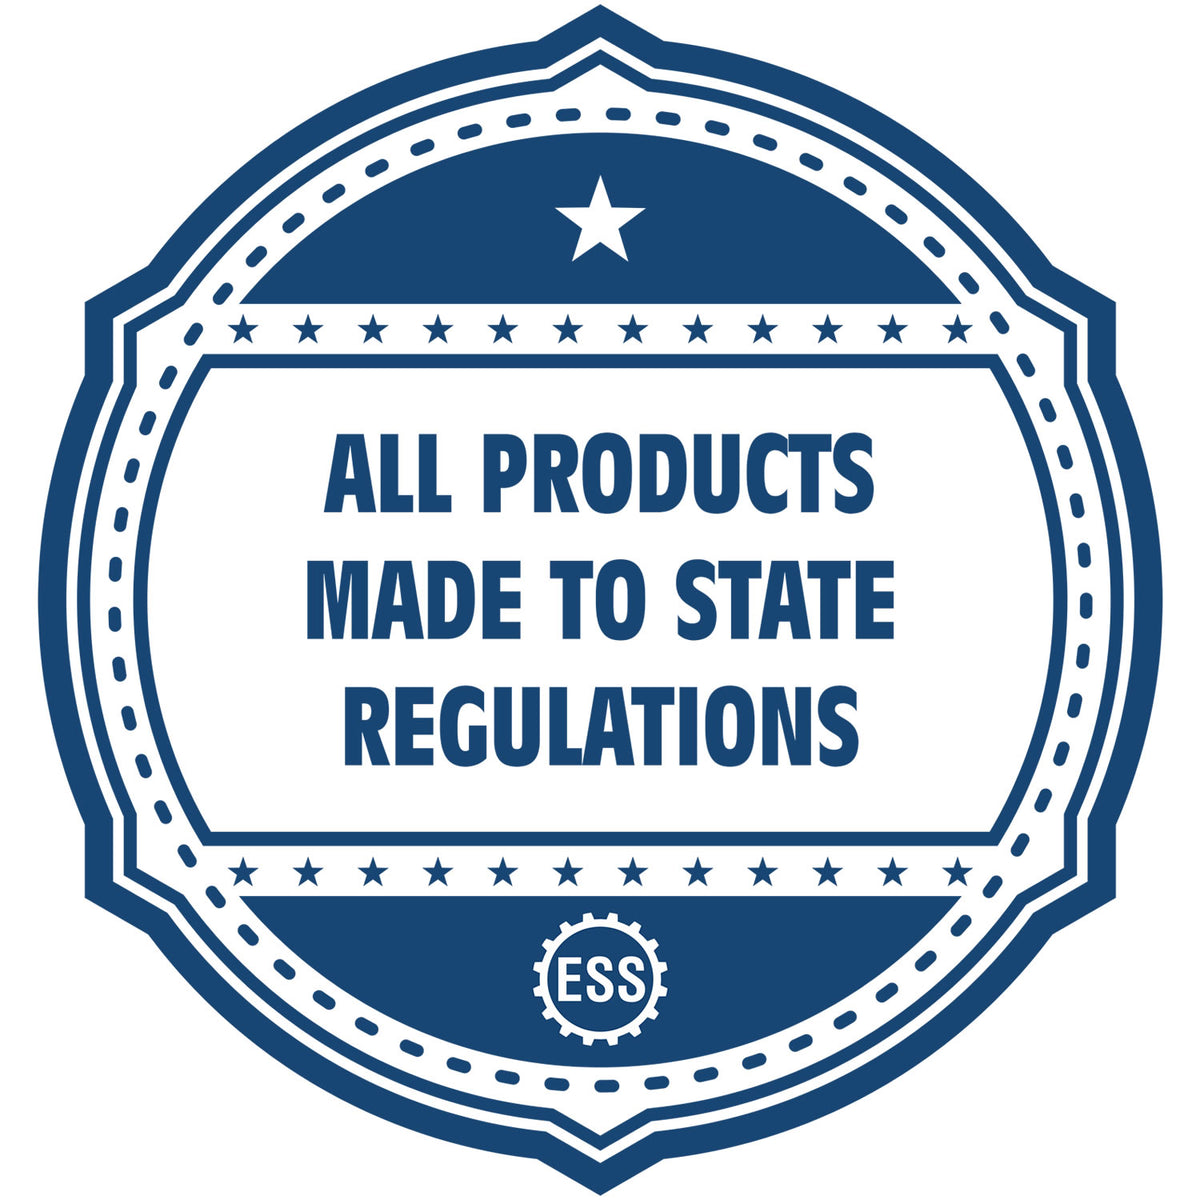 An icon or badge element for the State of Ohio Extended Long Reach Engineer Seal showing that this product is made in compliance with state regulations.